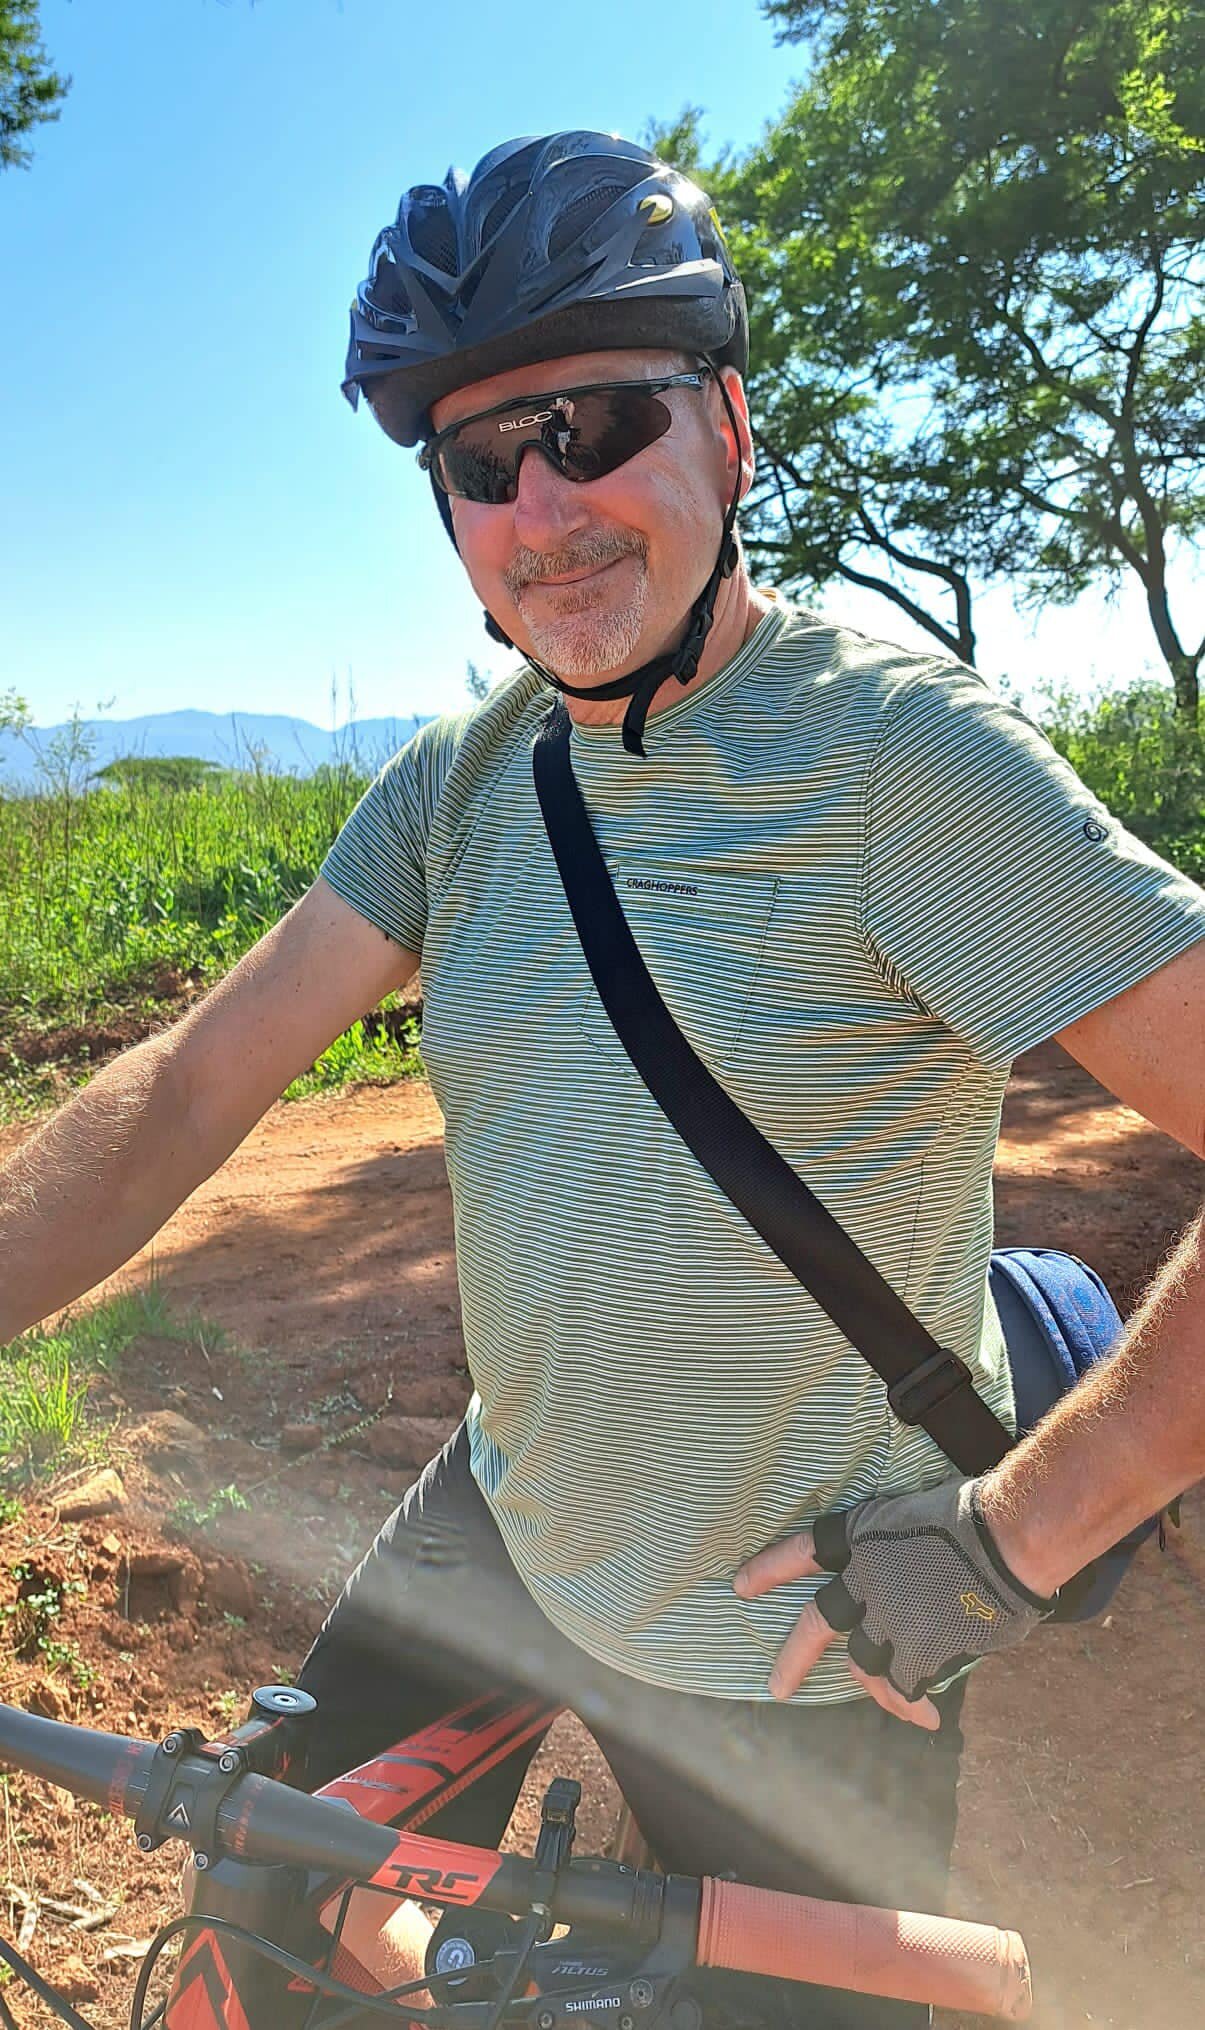 A message from Nelly and Dan:

As you may be aware, Steve died in a mountain bike accident in Swaziland on Tuesday 24 October.

Steve died doing something he dearly loved and kept his sense of adventure right until the end. 

We will all miss him gre